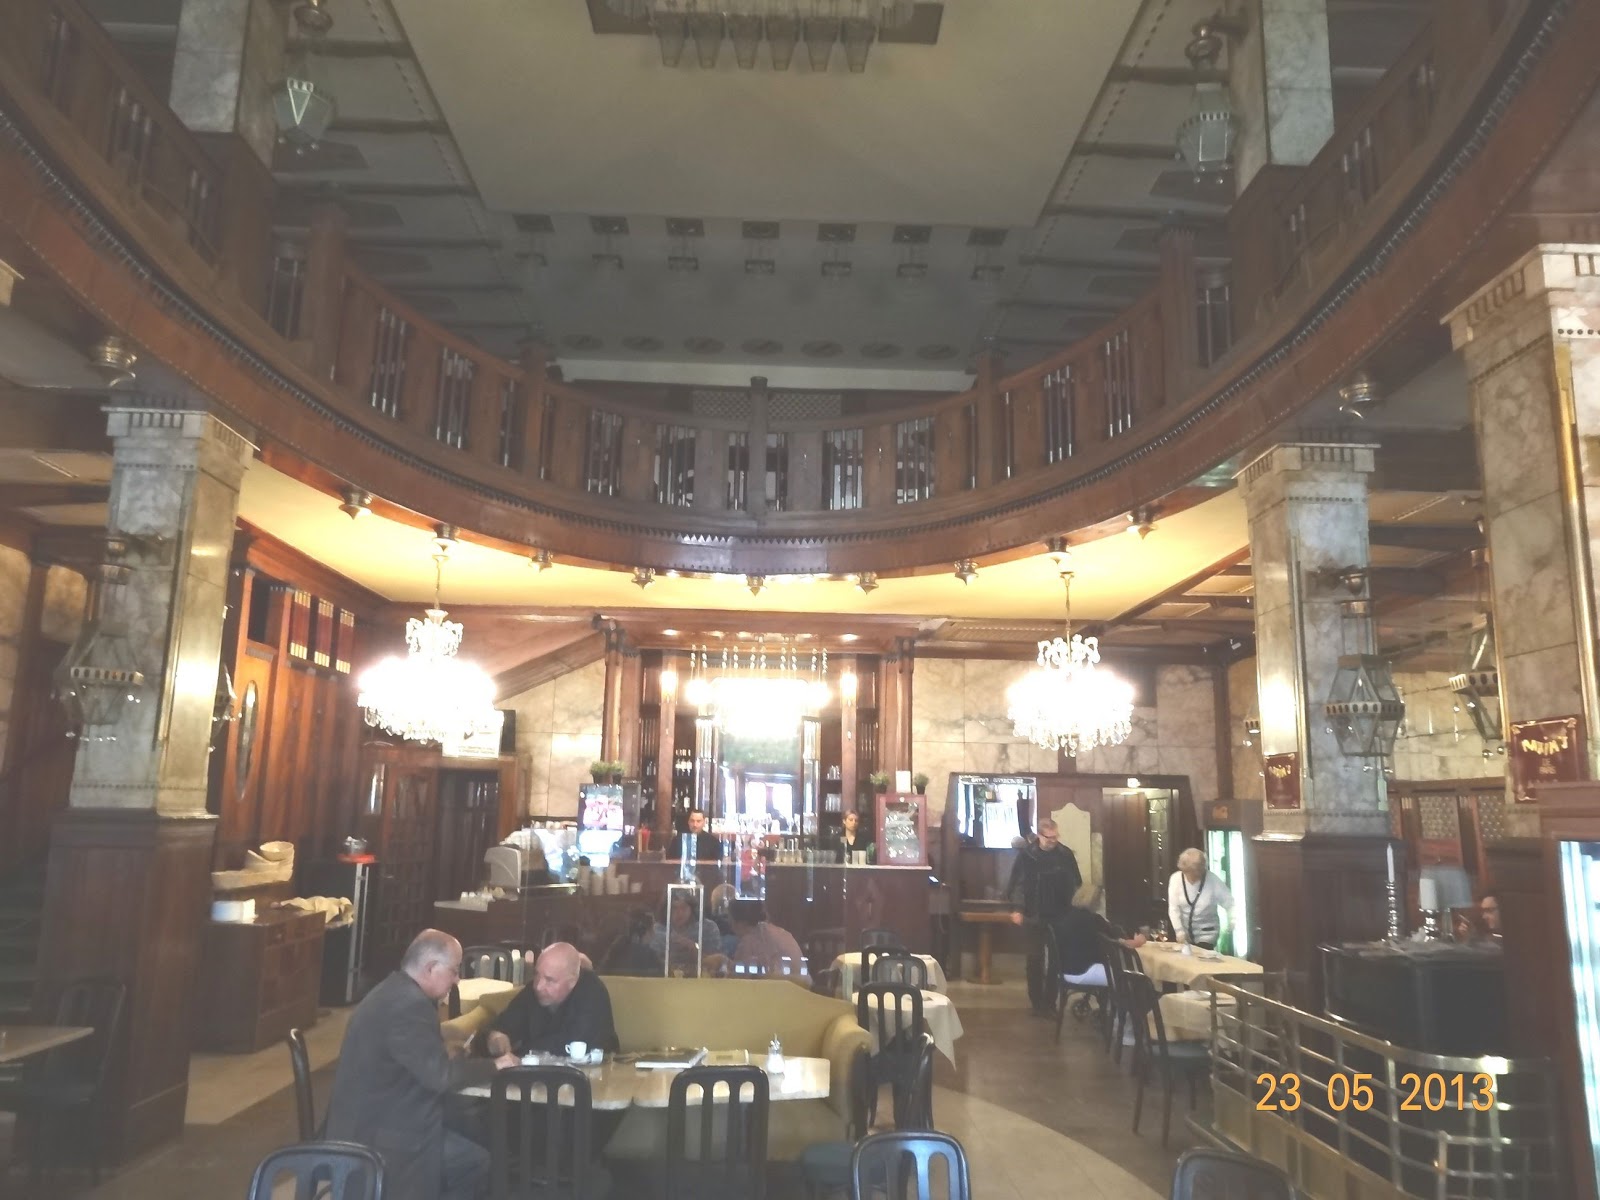 Art Nouveau cafe of Hotel Evropa belongs to the most beautiful interiors in Prague. The cafe allegedly served as a model for the interiors of the Titanic, but I could not find this information as proven...